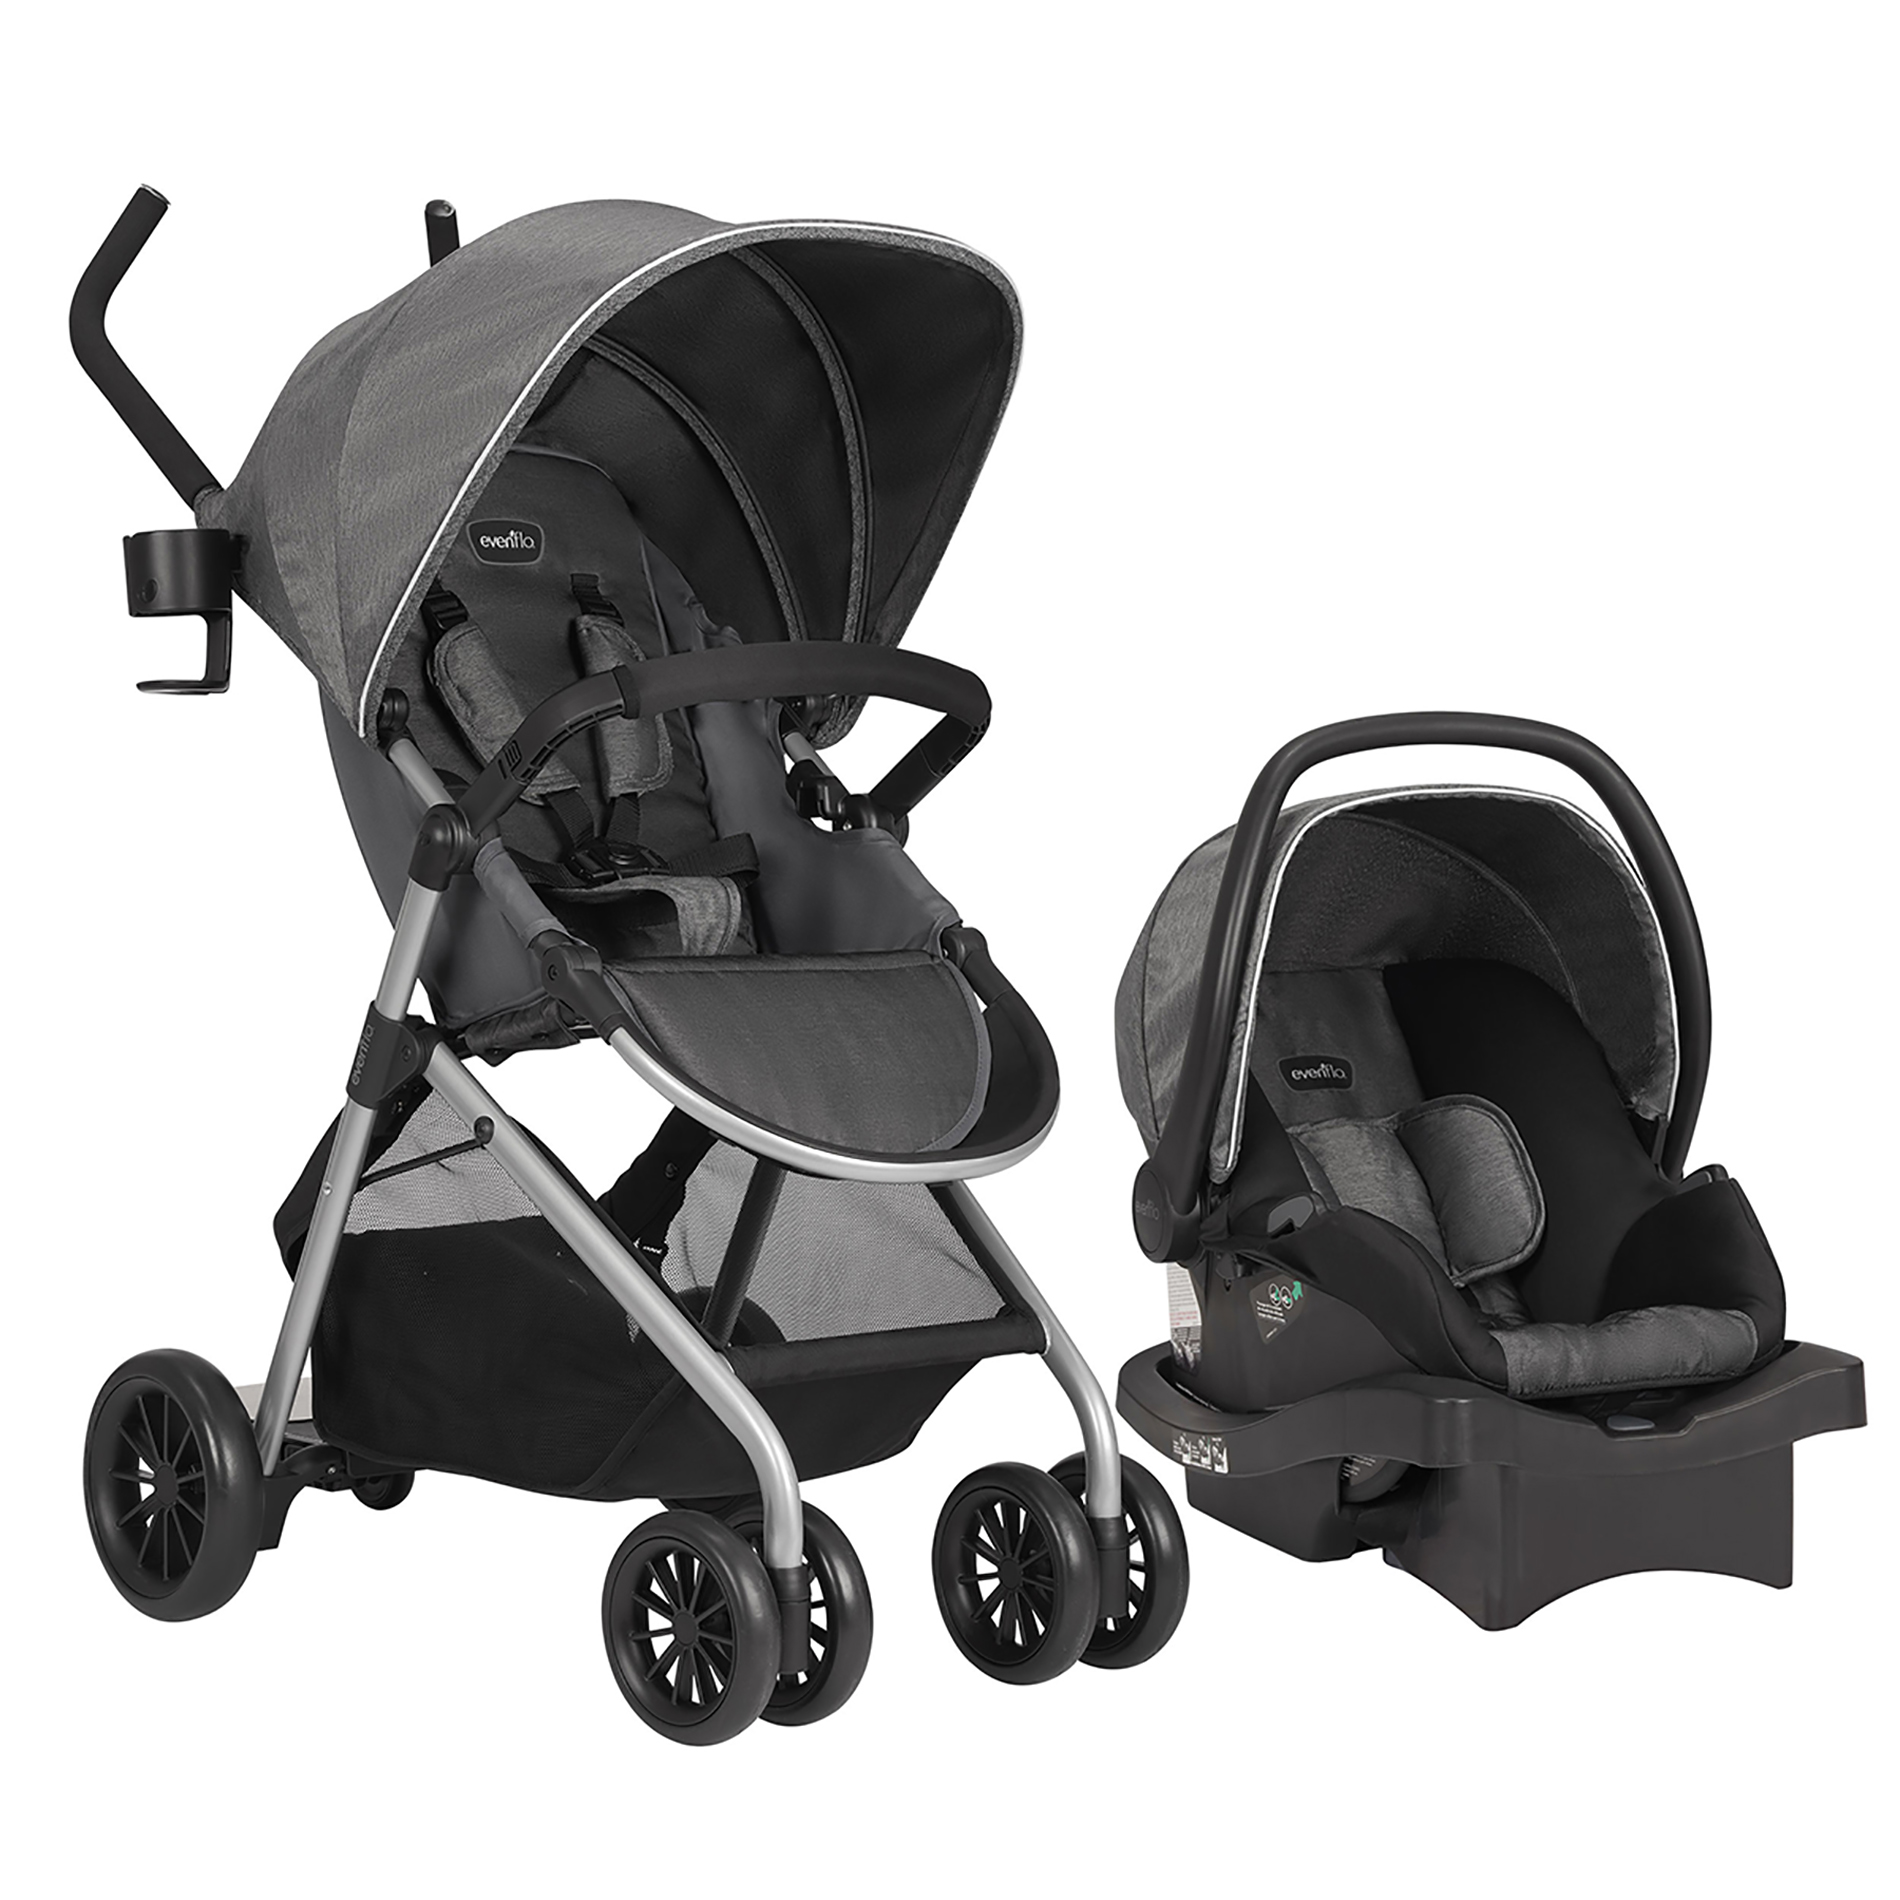 Evenflo Sibby Travel System with Infant Car Seat